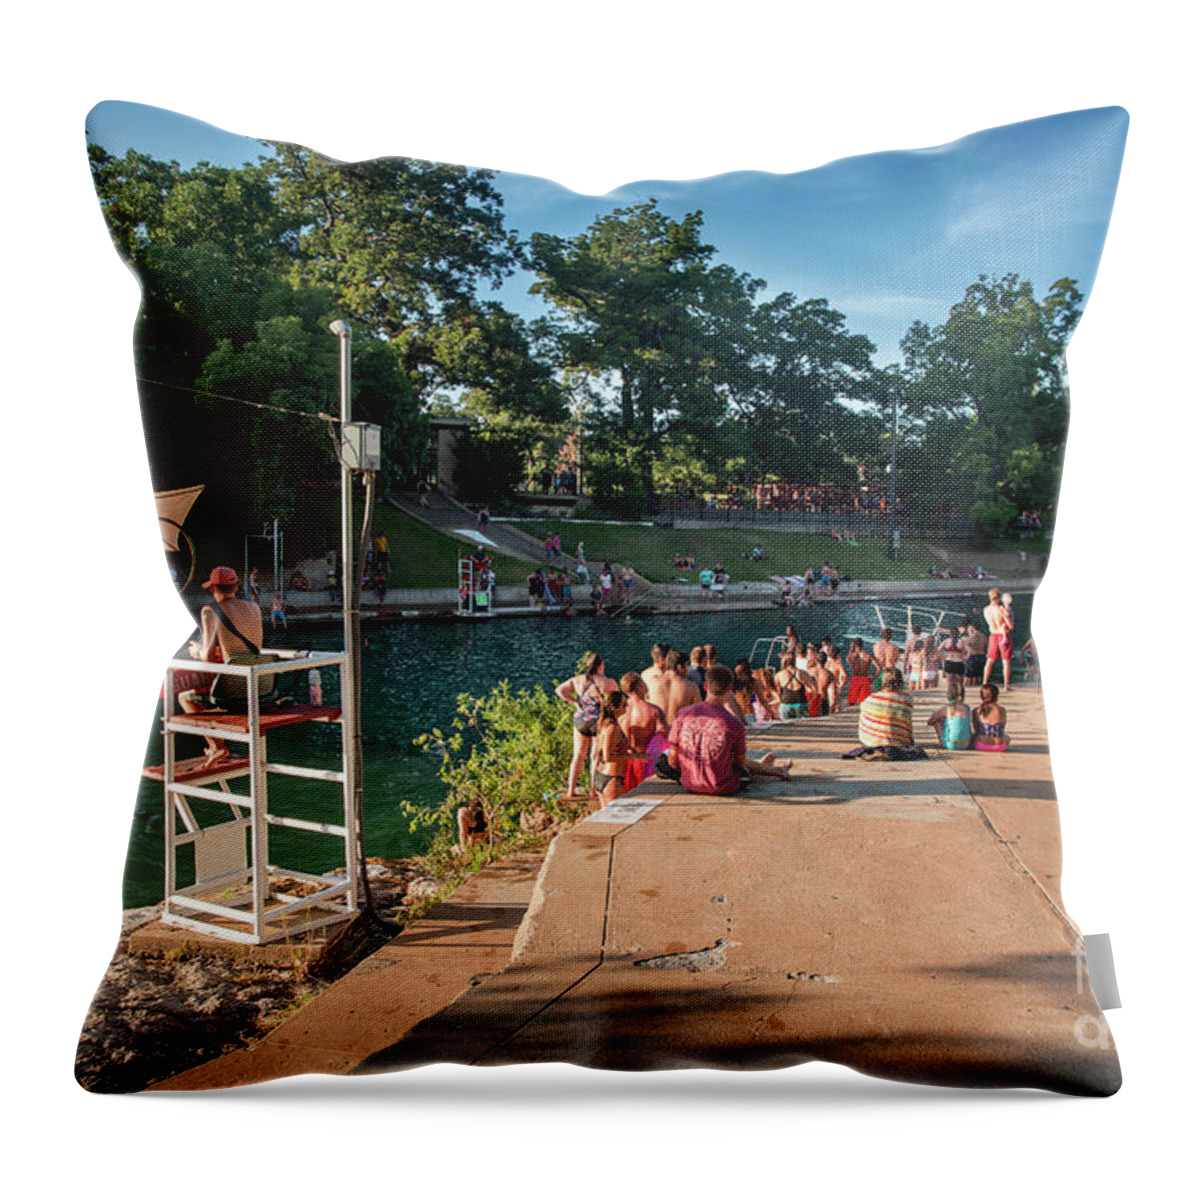 Barton Springs Pool Throw Pillow featuring the photograph The diving board at Barton Springs Pool is always a popular acti by Dan Herron